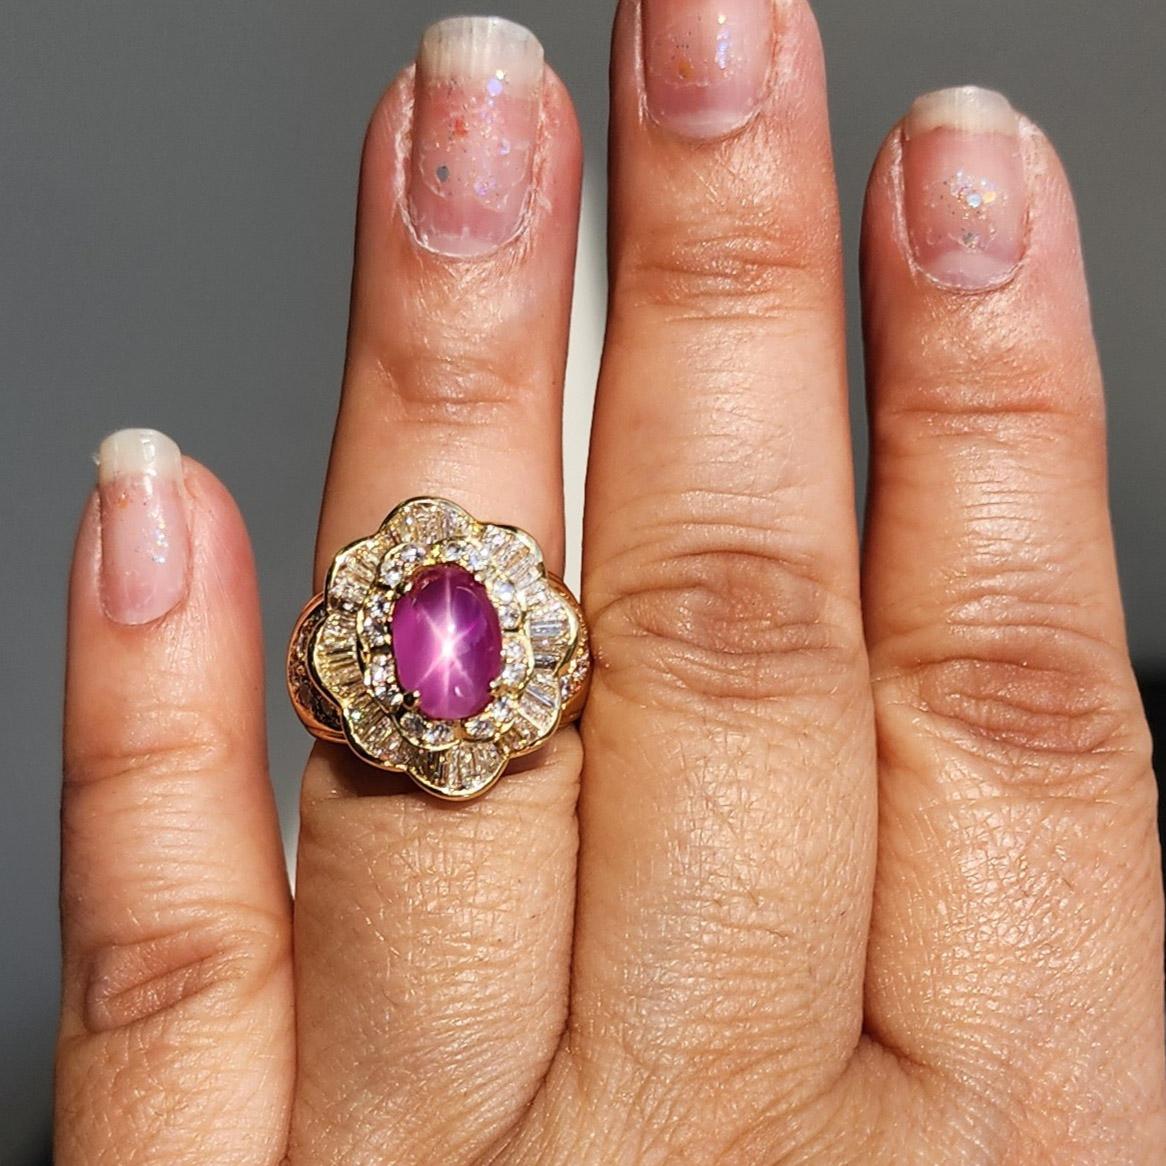 Gorgeous 3.56 ct. GIA unheated Burma purplish pink star ruby oval cabochon with 2.50 ct. good quality white diamond rounds and baguettes.  Handmade in 18k yellow gold.  Ring size 6.75.
GIA certificate included.